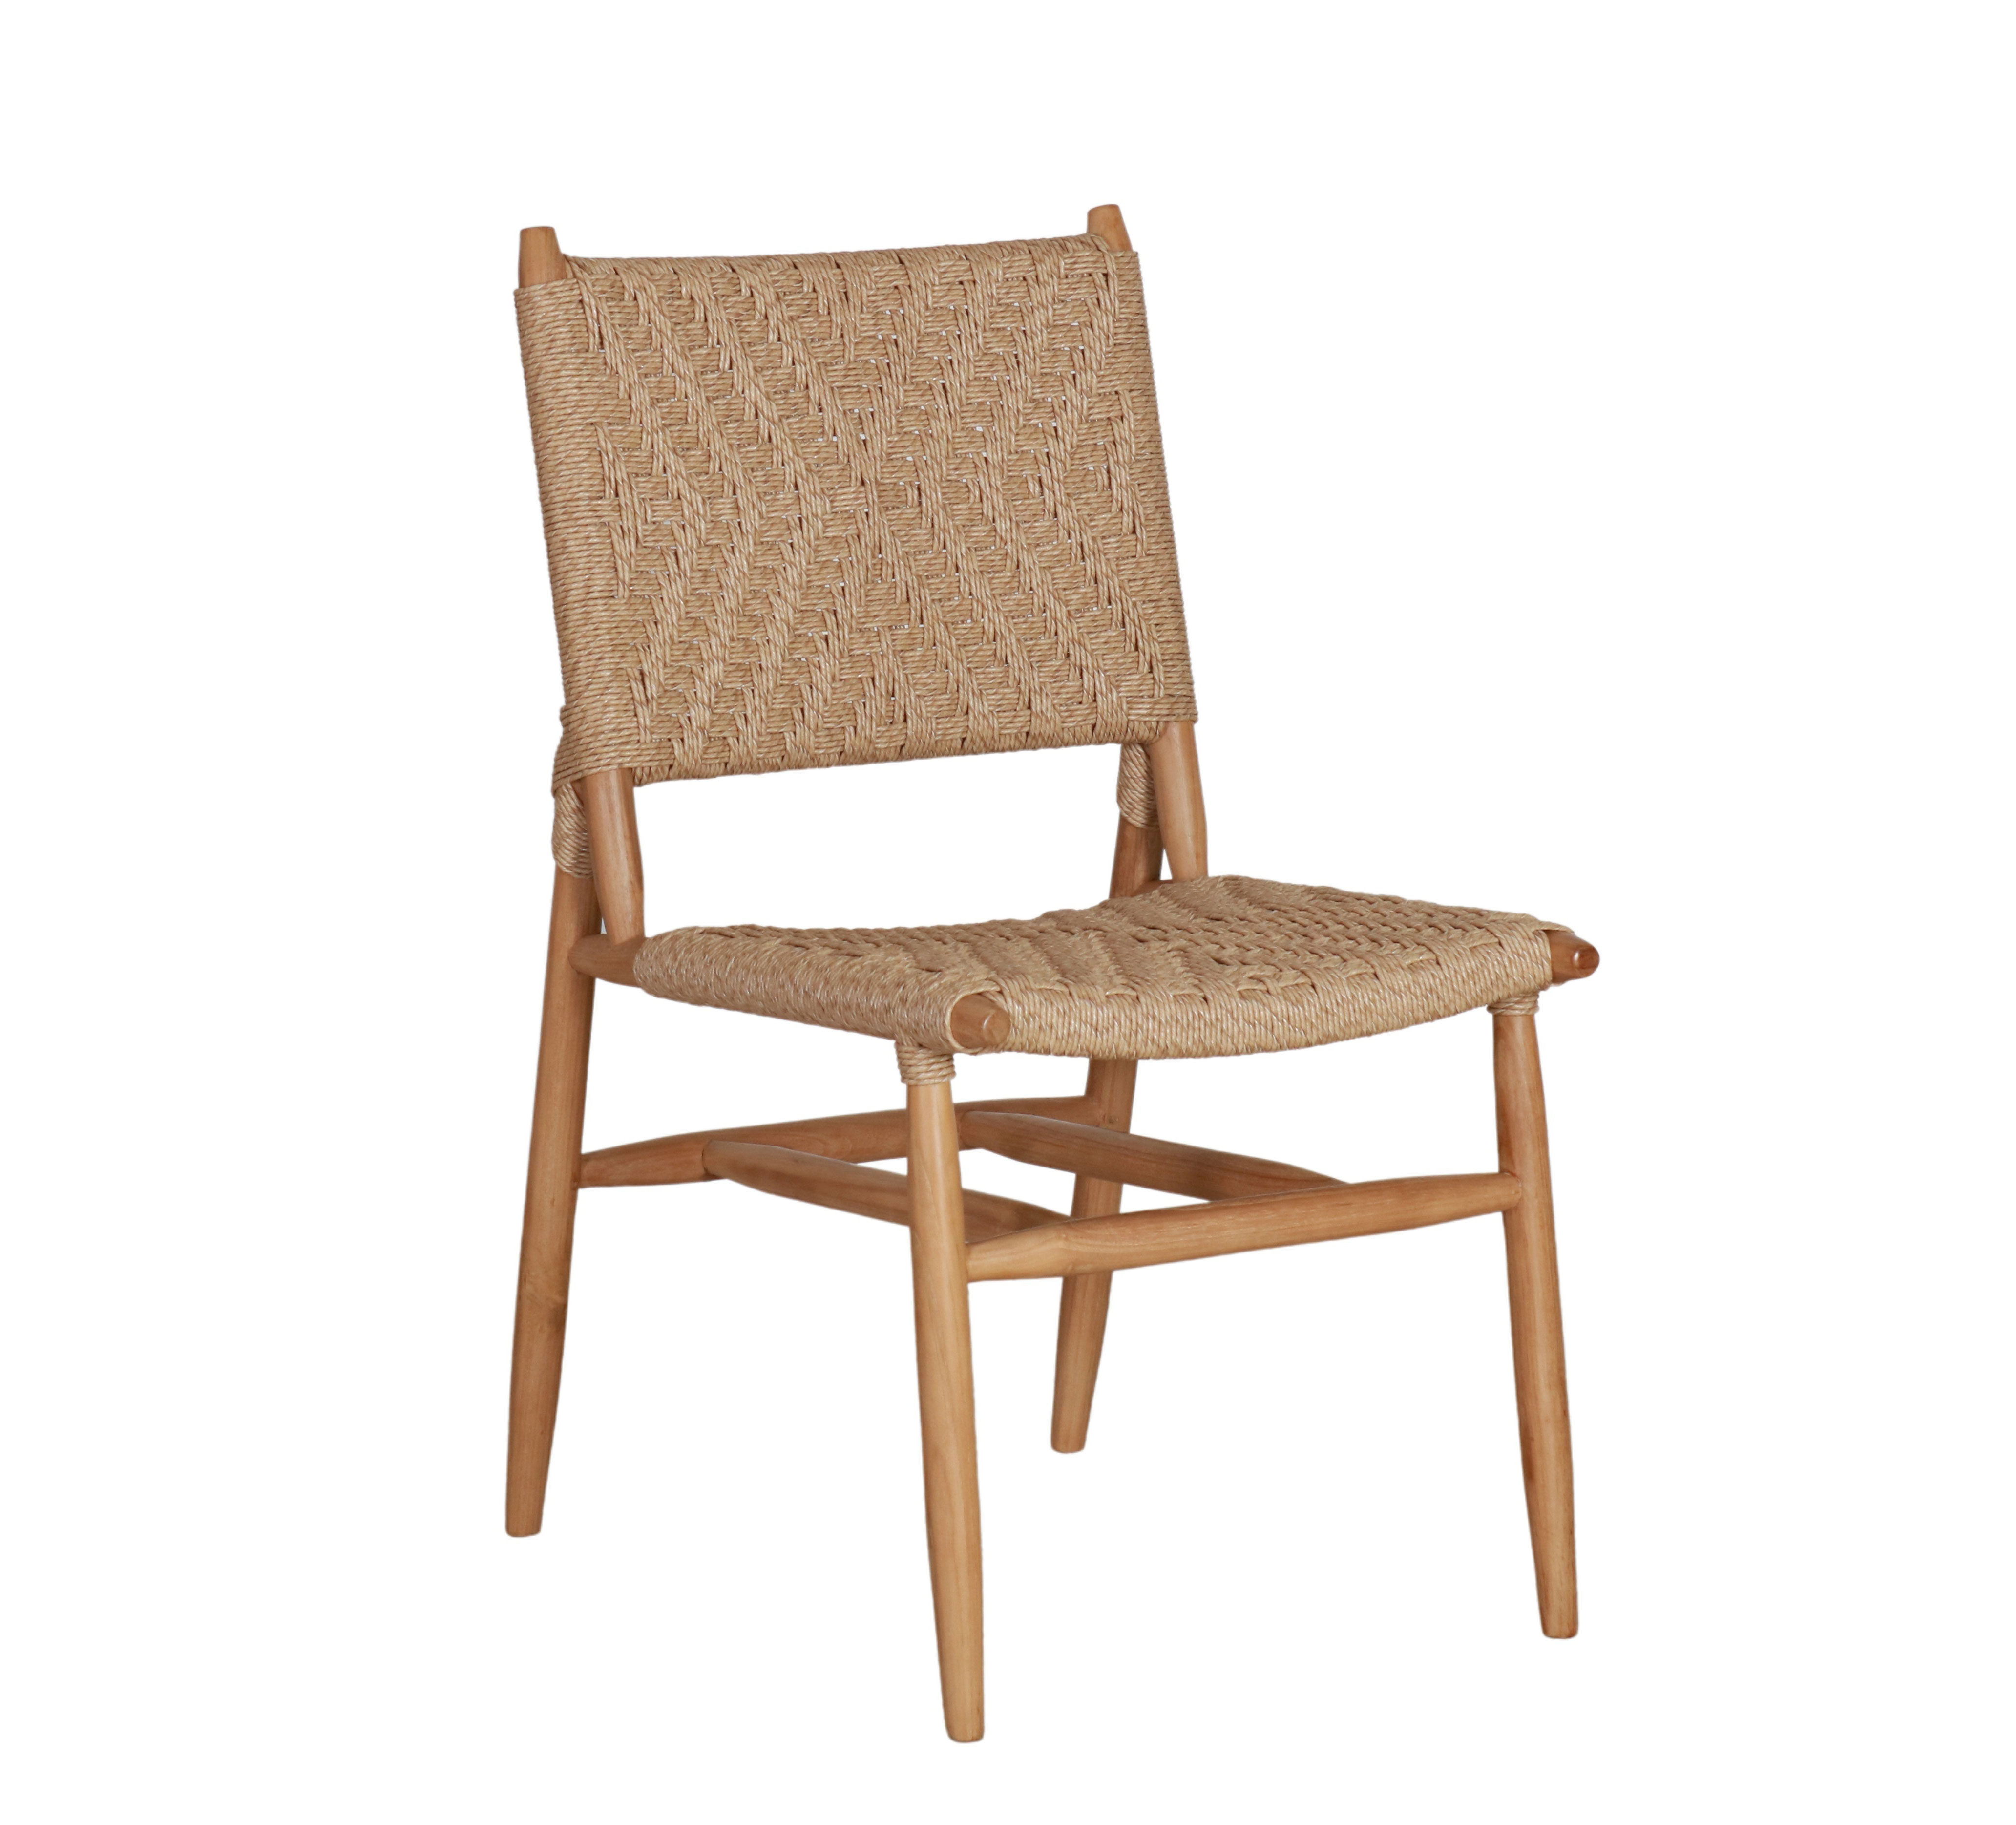 Teak and rope outdoor chair Resort collection 